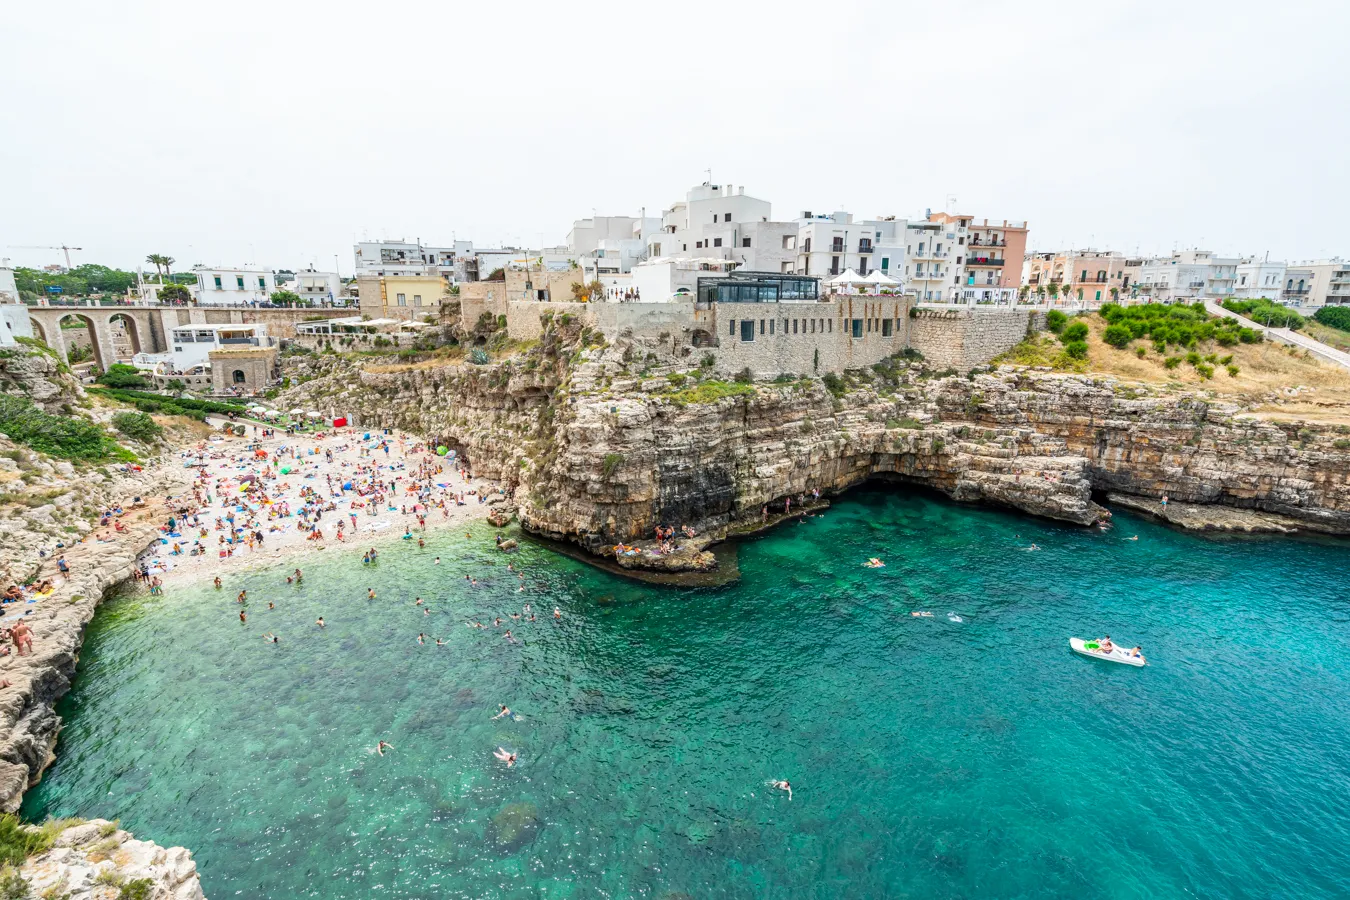 famous beach of polignano a mare as seen from above on a puglia road trip itinerary